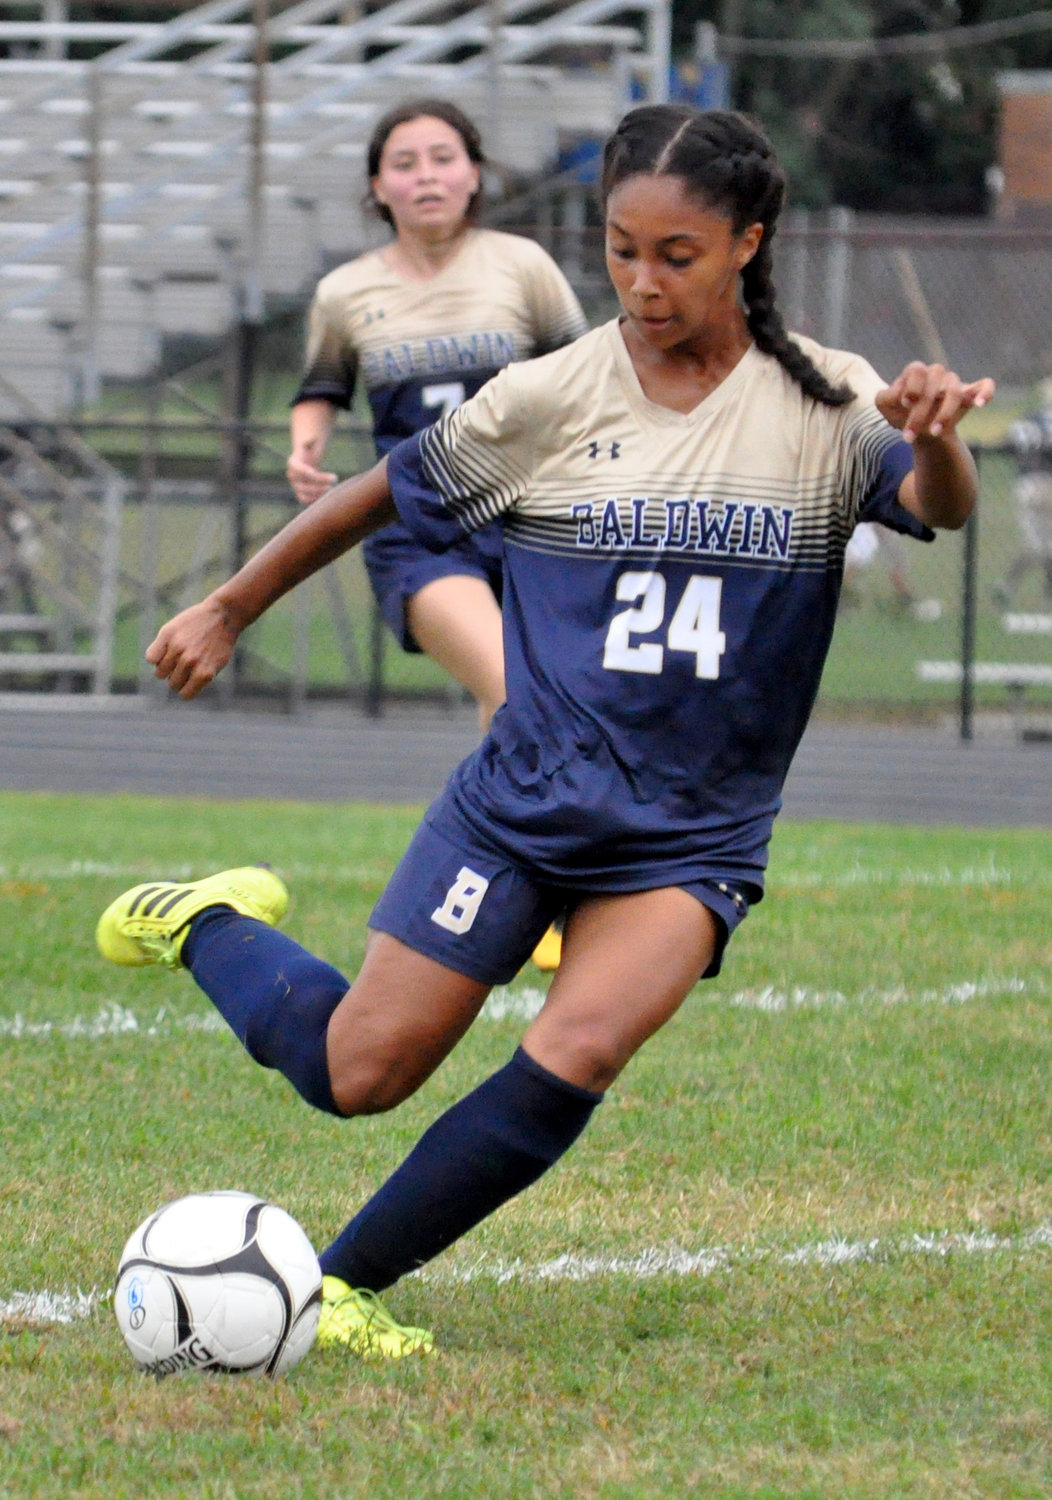 Annabelle Lopez, who had 4 goals and 3 assists this fall, was part of a prolific offense for a Baldwin side which won 10 games in Conference AA2.